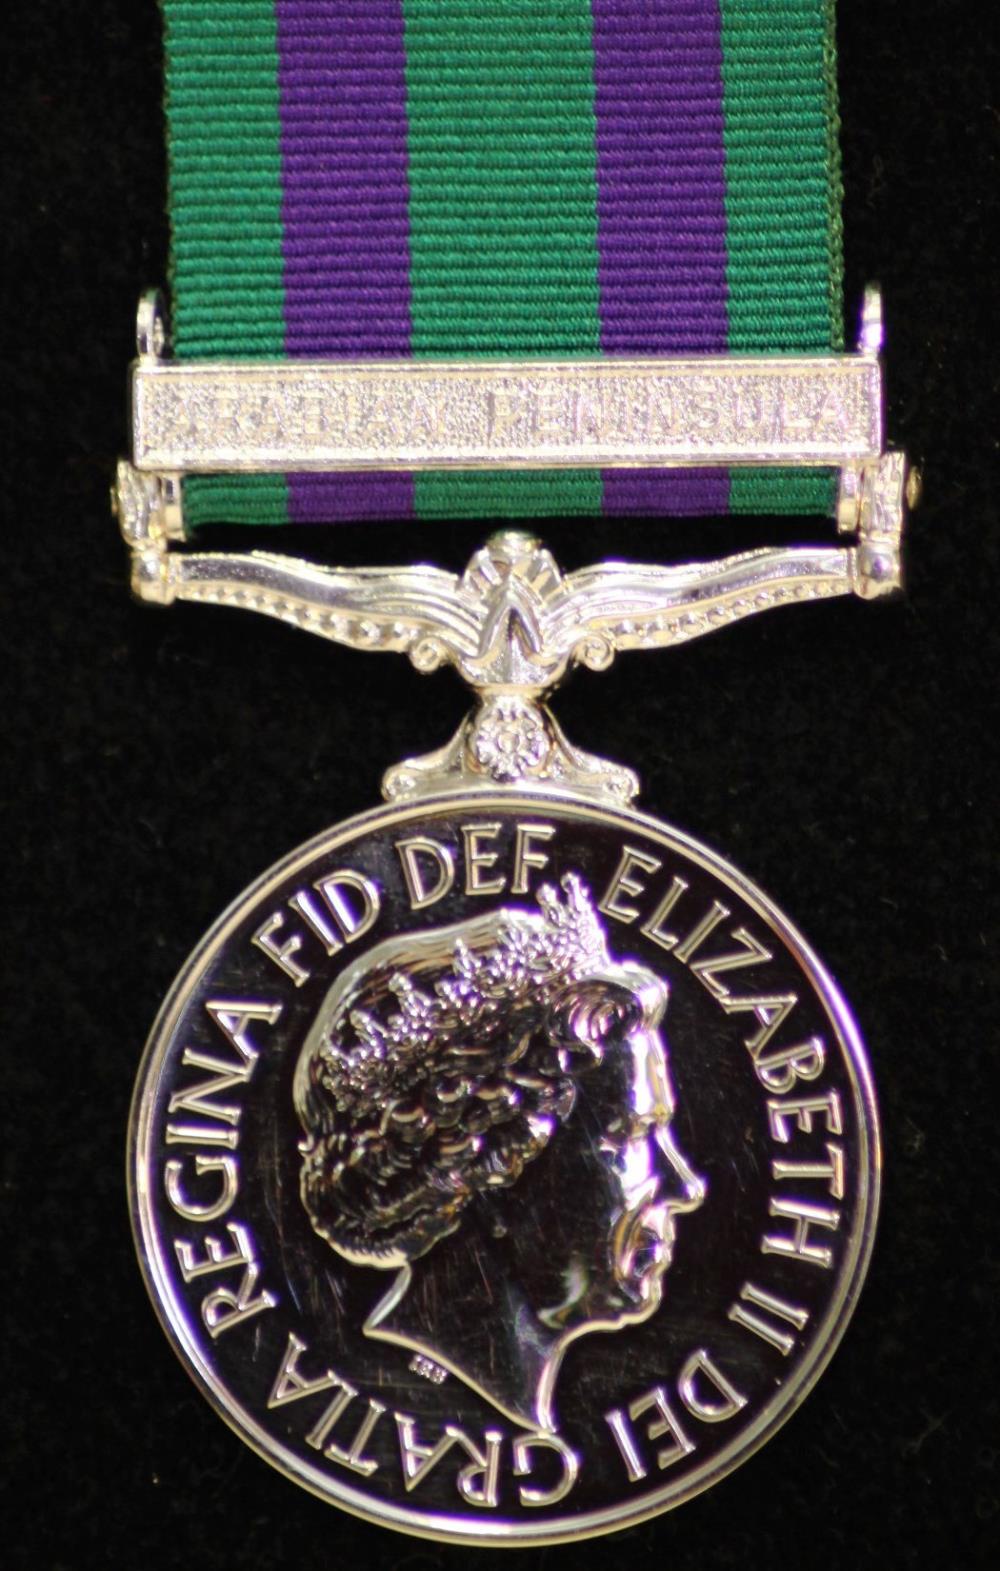 Worcestershire Medal Service: GSM 2008 with clasp Arabian Peninsula